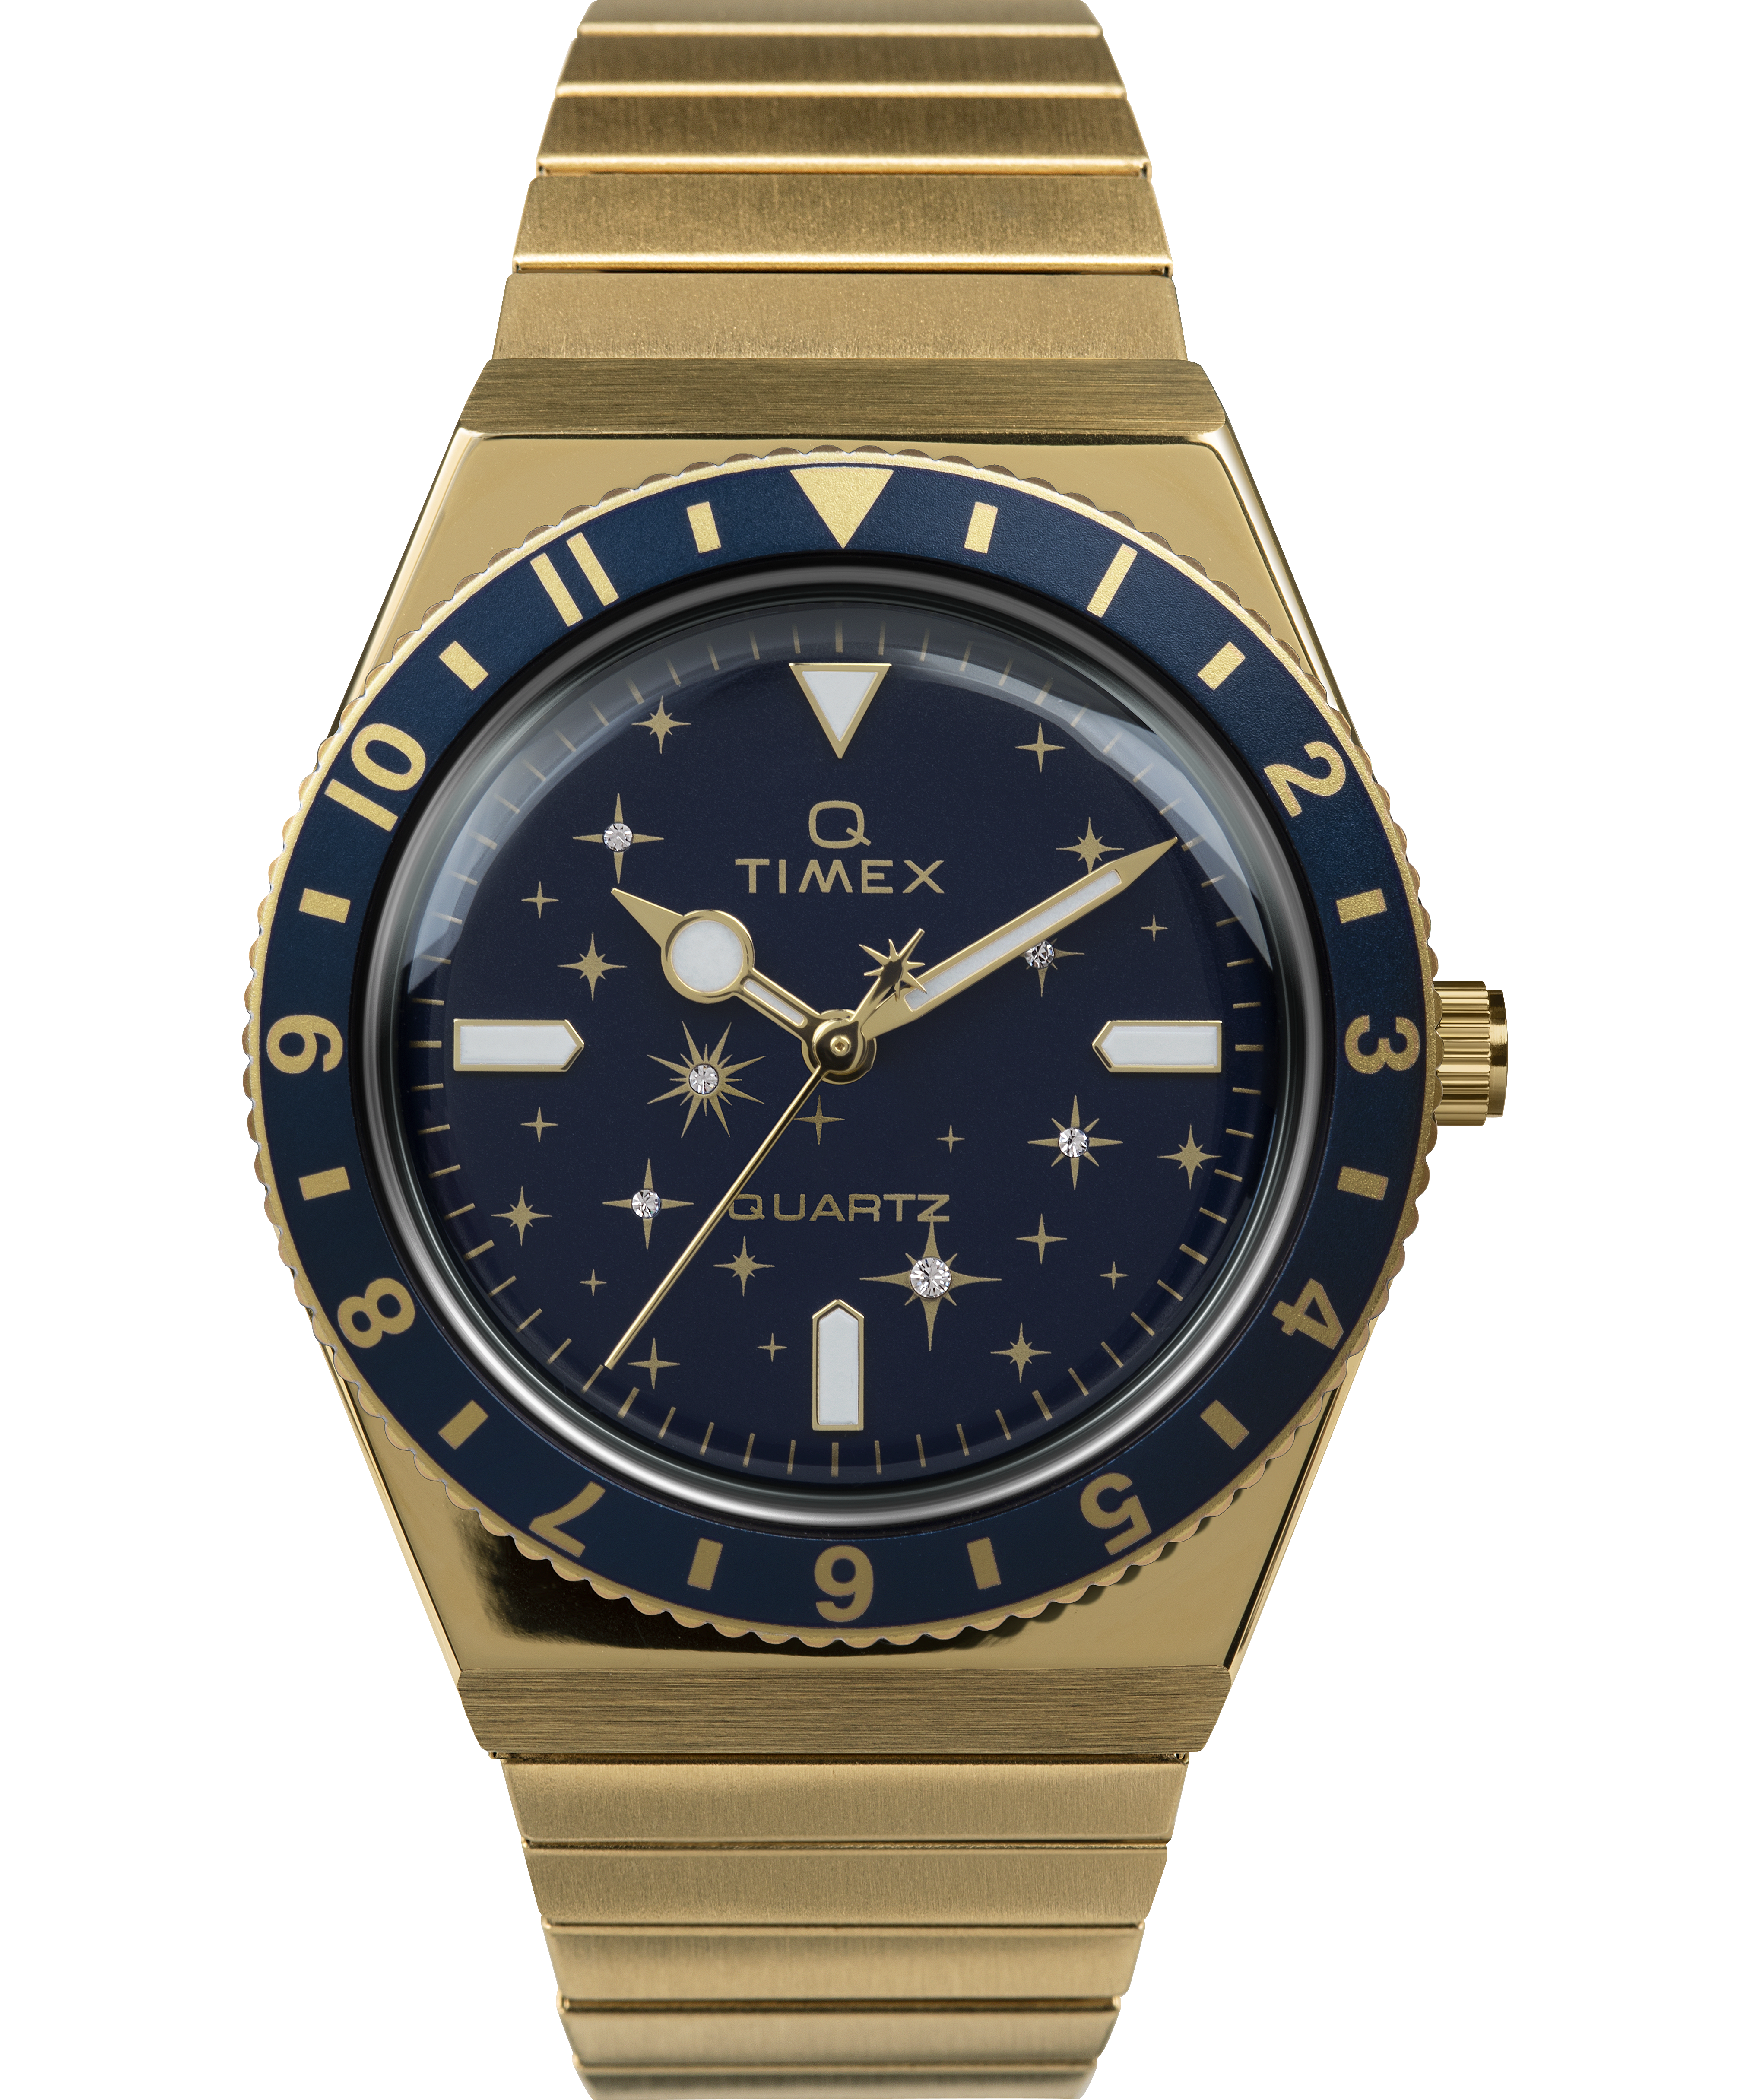 Q Timex Celestial 36mm Stainless Steel Expansion Band Watch Gold-Tone/Blue large